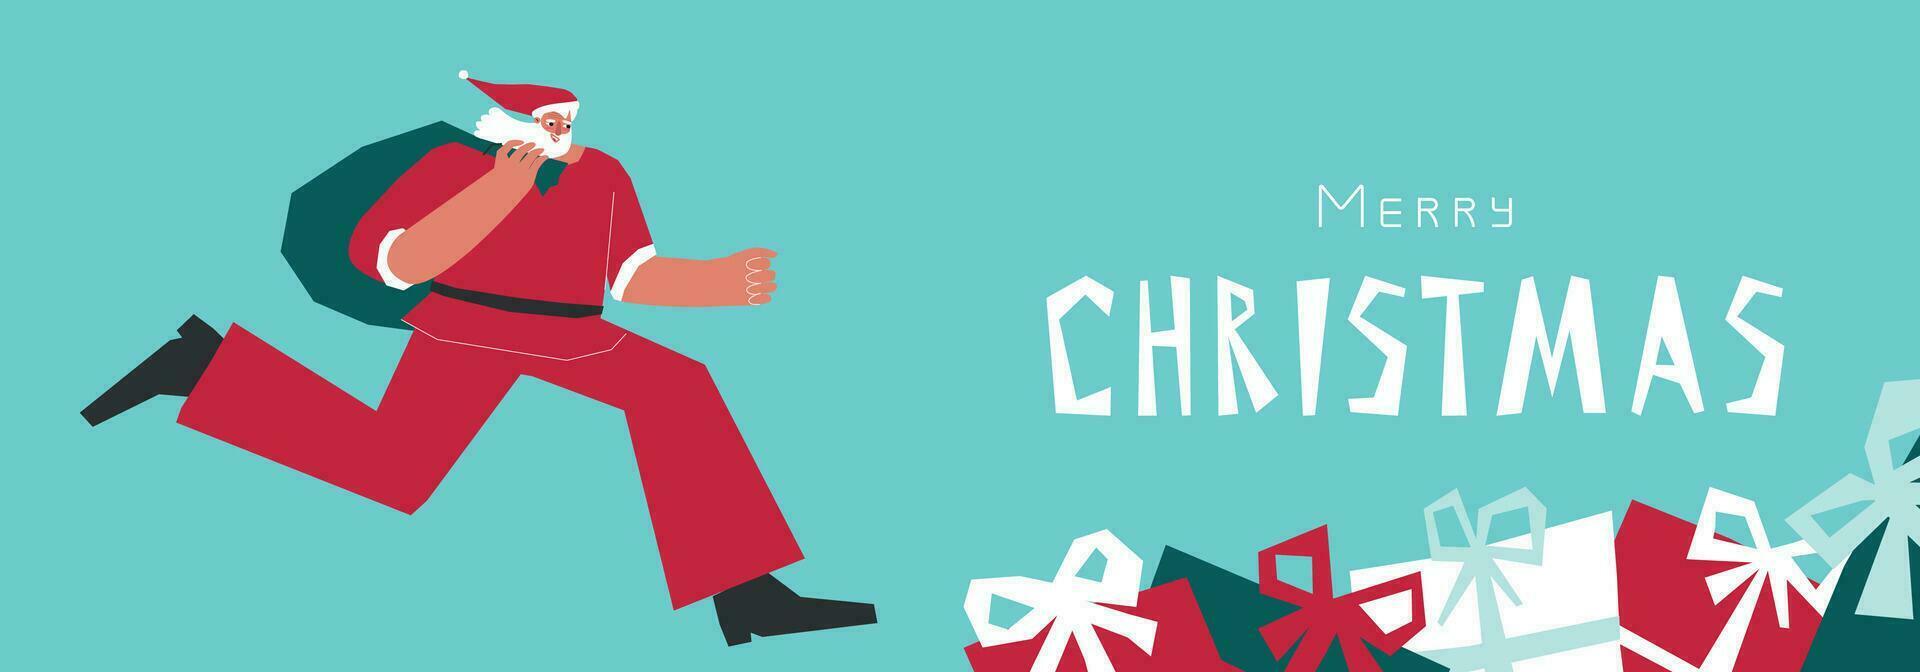 Vector illustration with flat character of Santa Claus in red costume. He runs and holds bag with gifts. Horizontal banner with text Merry Christmas on blue background